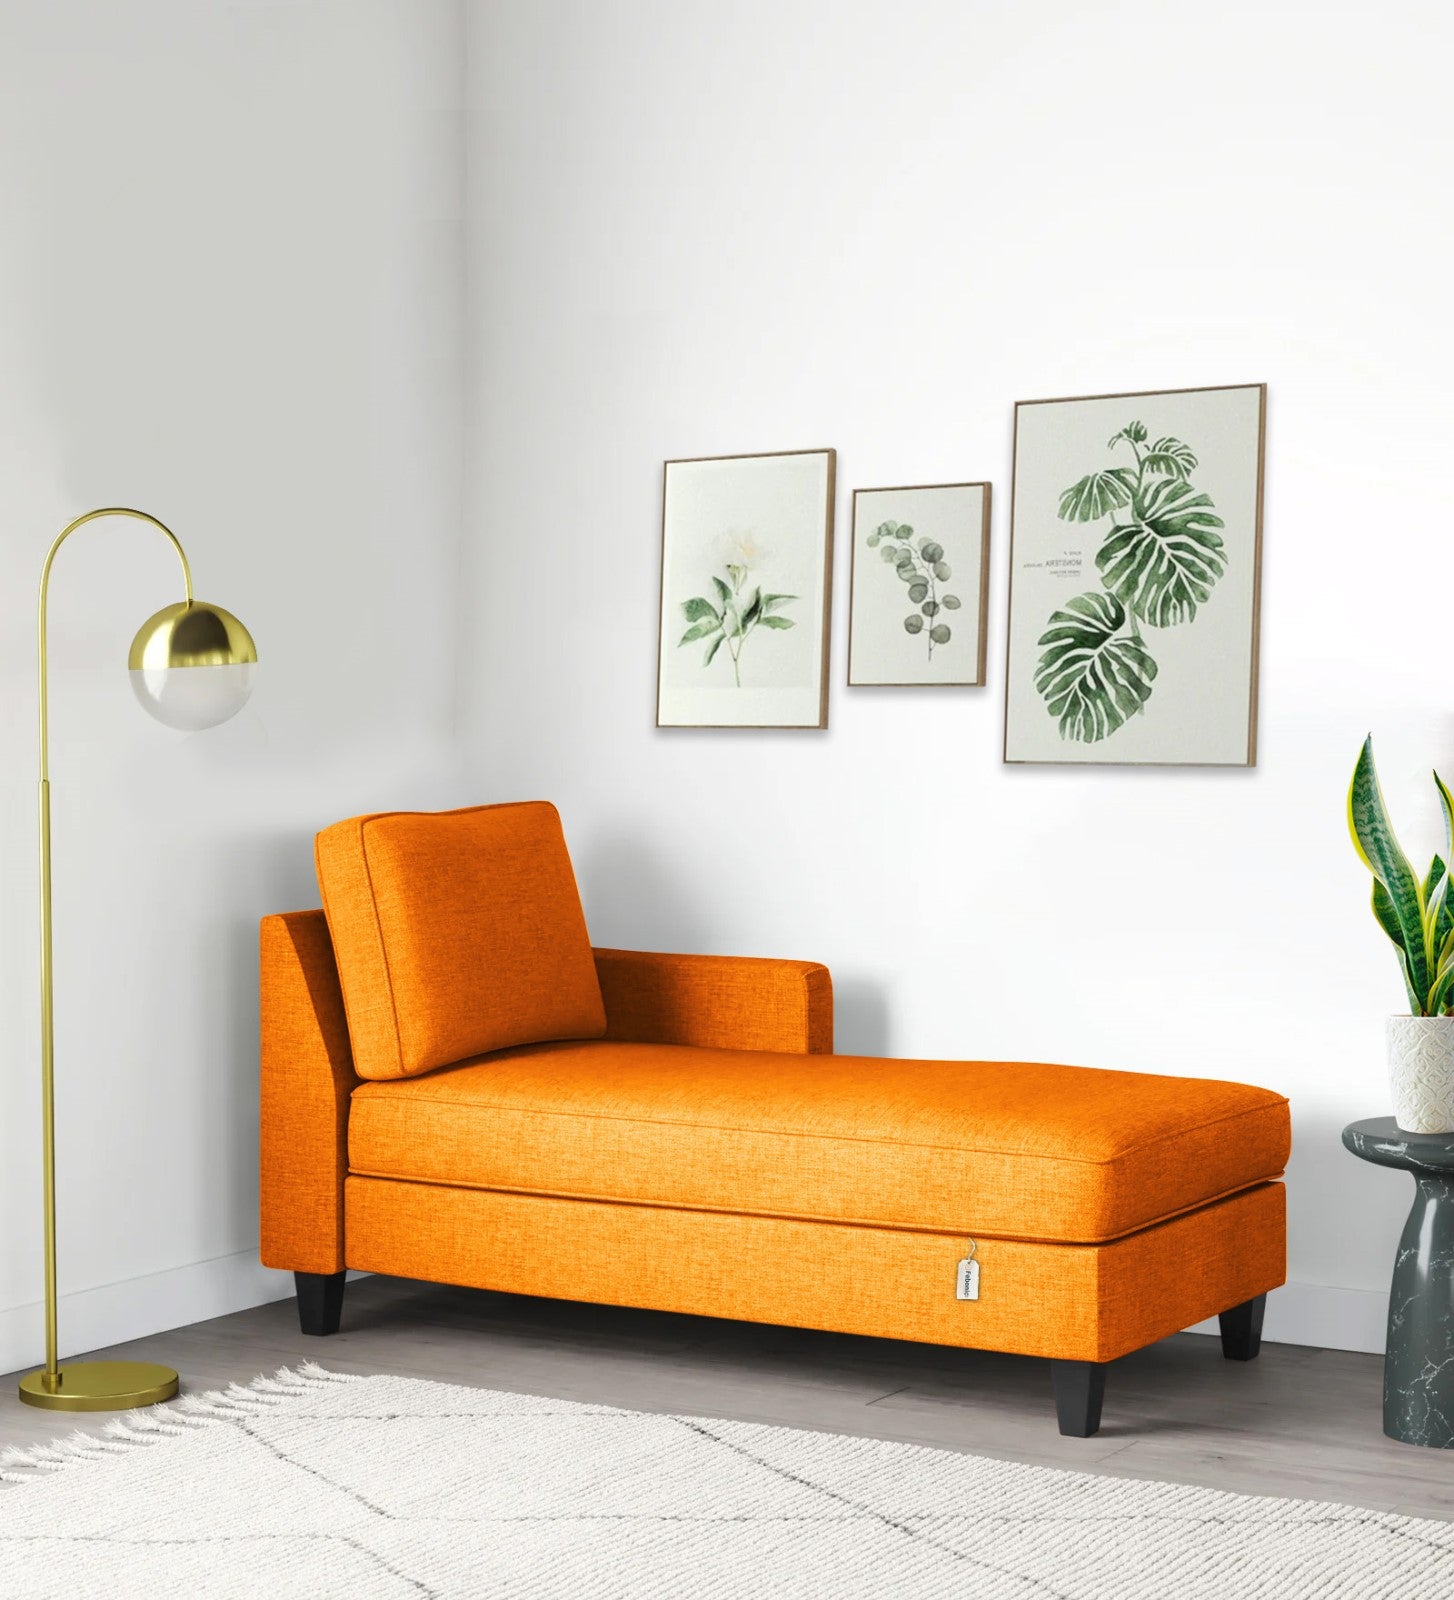 Royee Fabric RHS Chaise Lounger In Vivid Orange Colour With Storage